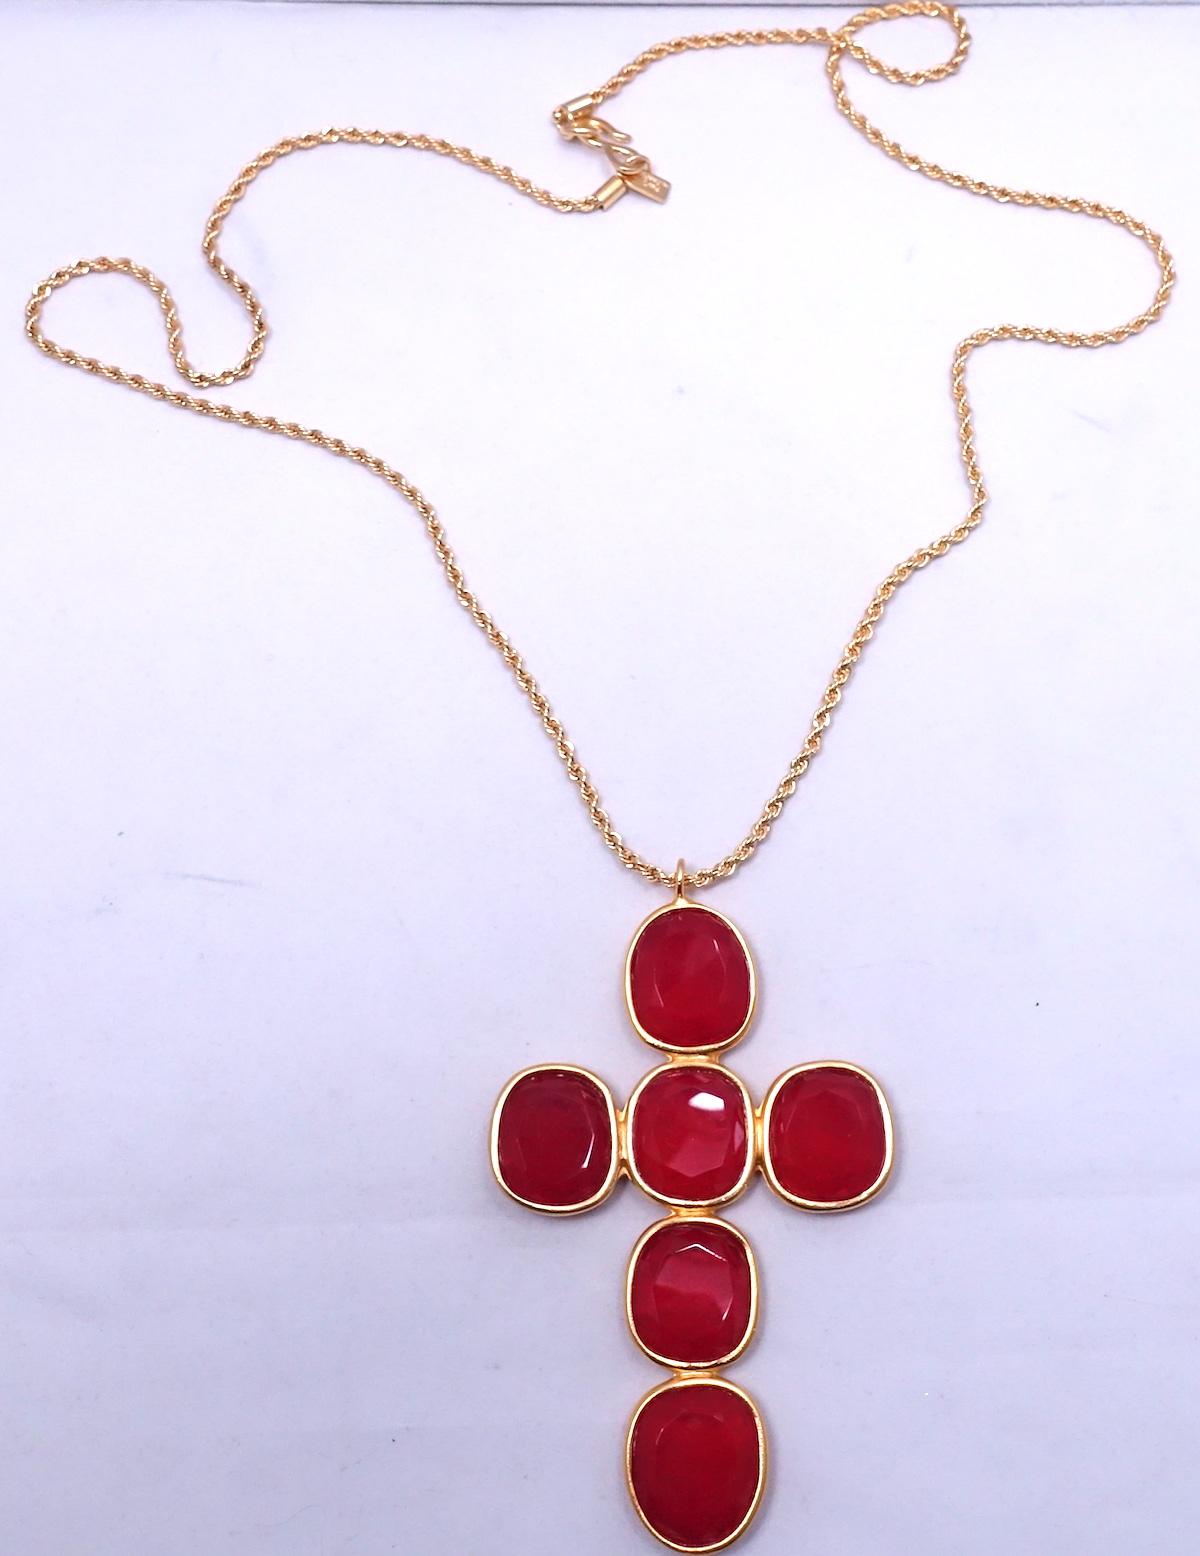 This signed Kenneth Lane necklace features a red Lucite cross in a gold tone setting.  The pendant measures 4-1/2” x 2-3/4”; the rope chain is 32” x 1/8” with a hook closure.  In excellent condition, this pendant necklace is signed “Kenneth Lane”.